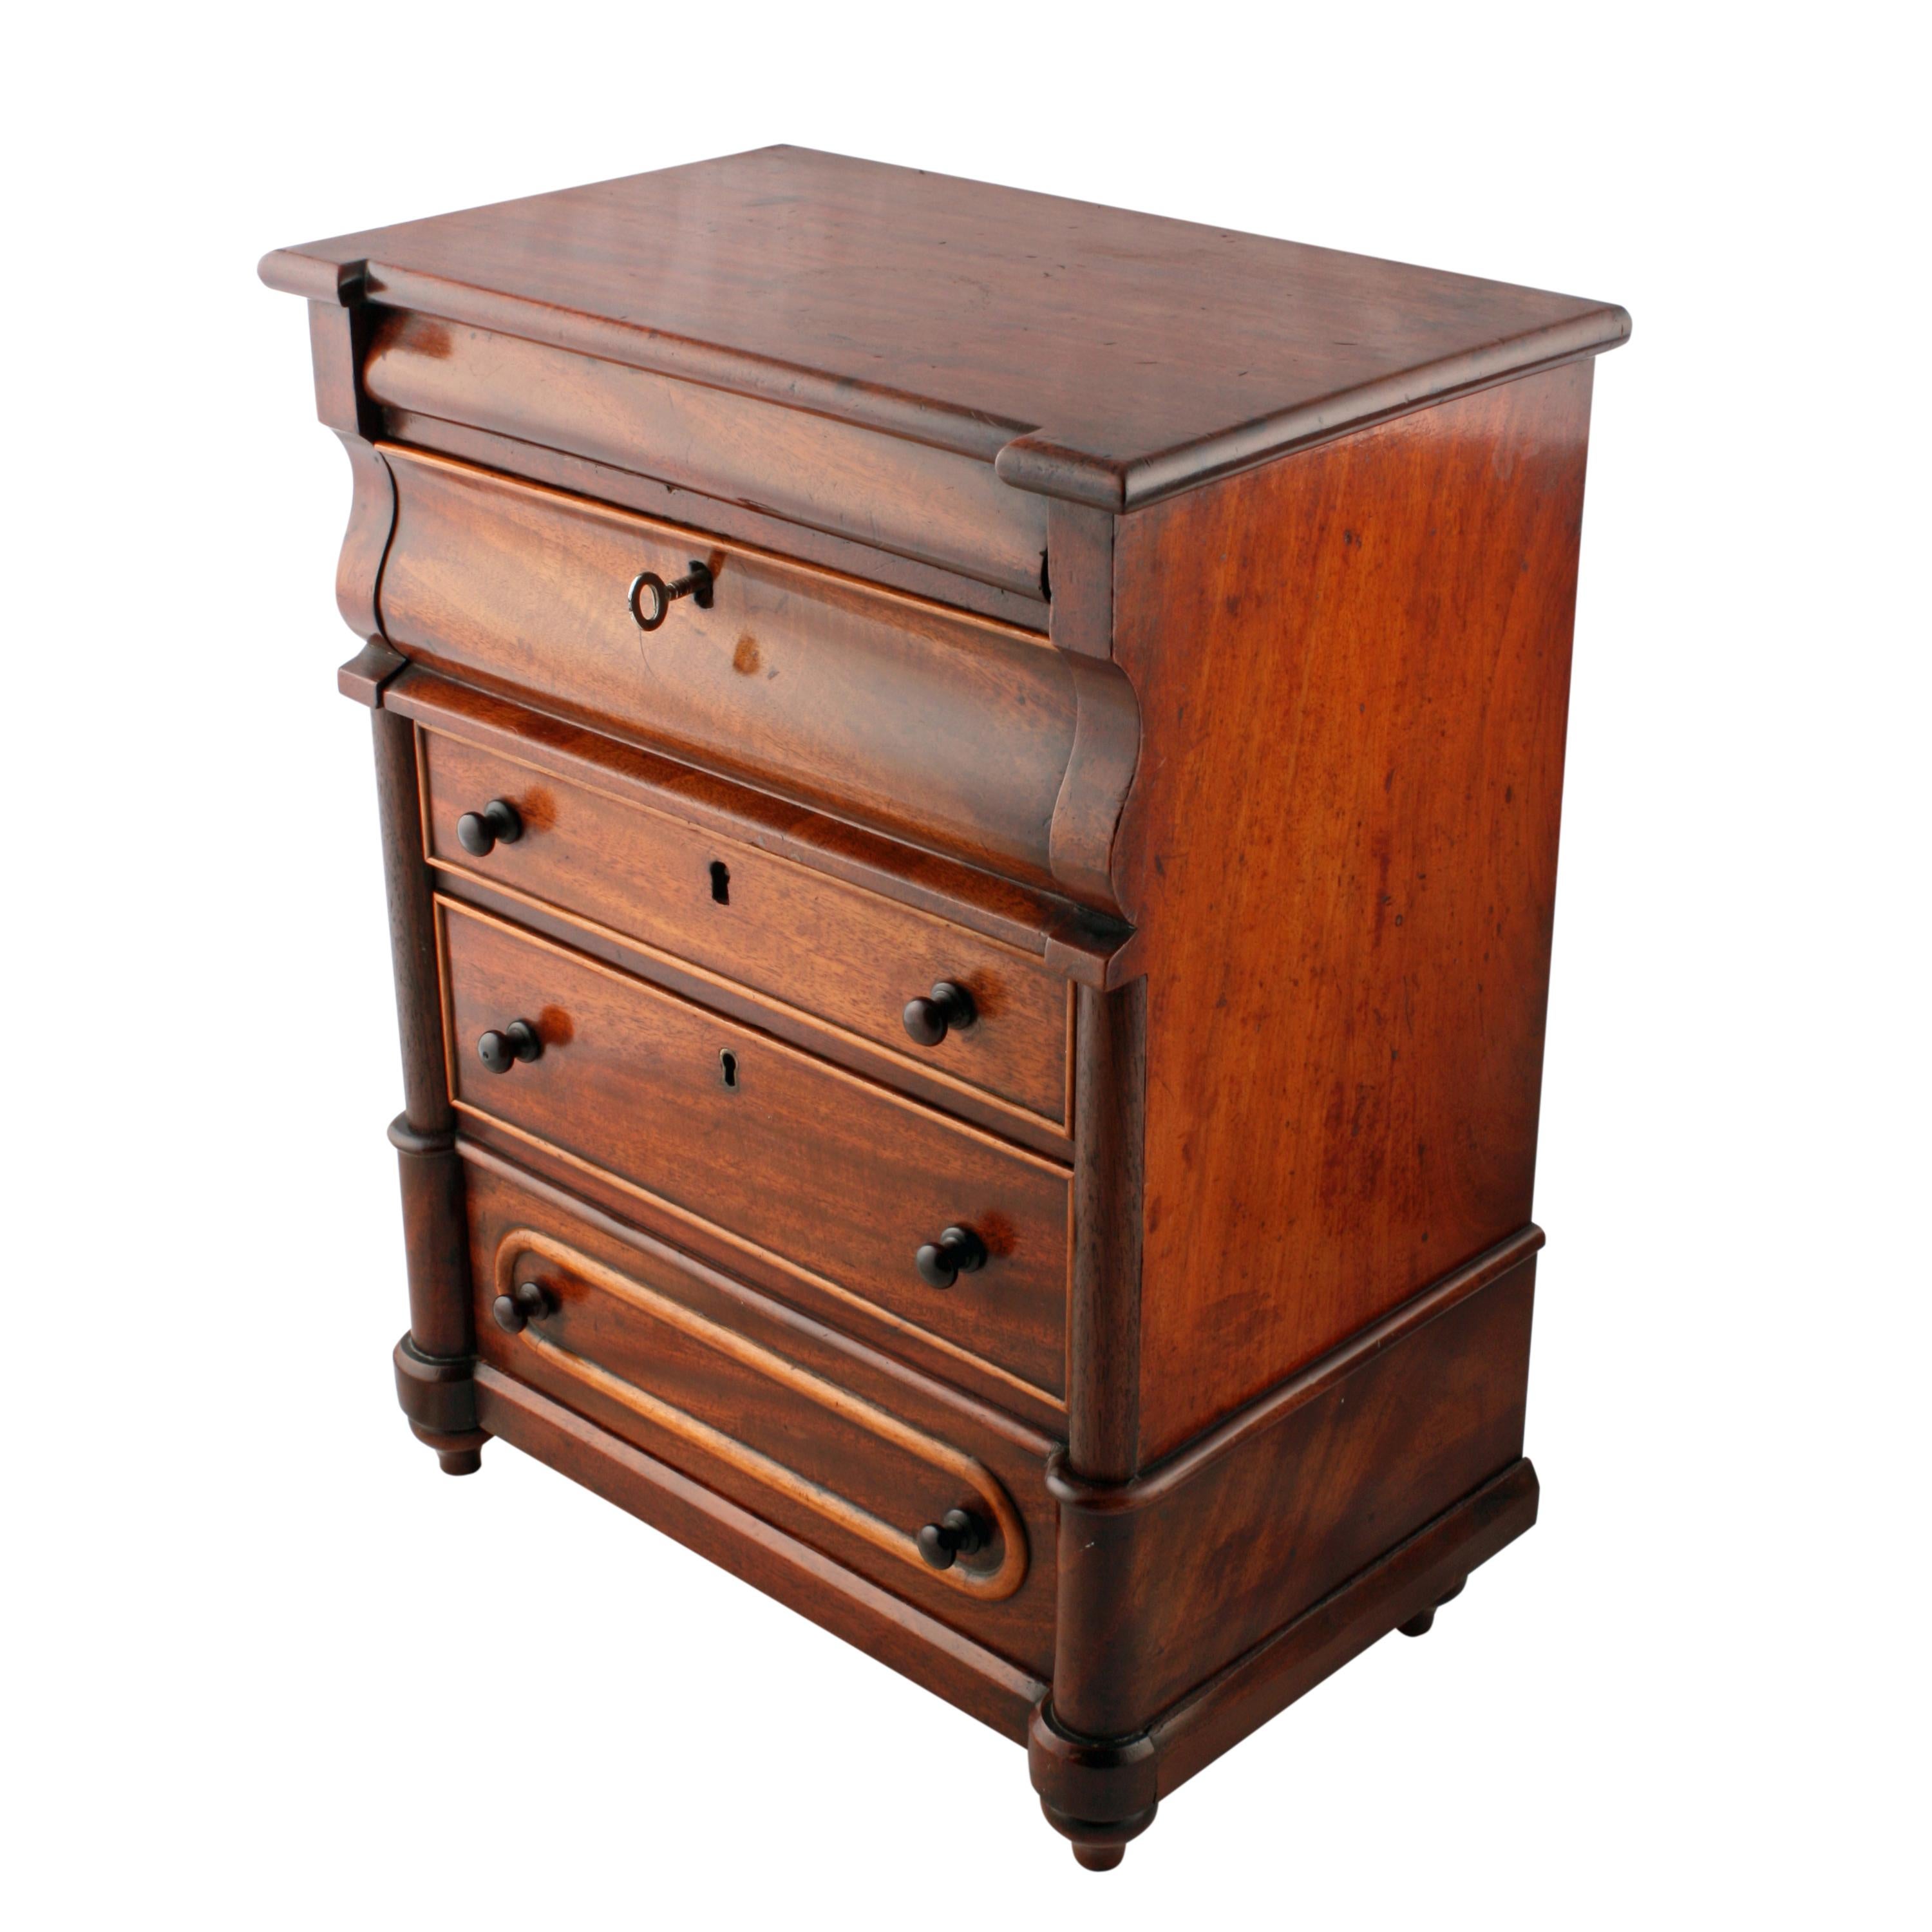 A middle of the 19th century Victorian miniature Scottish mahogany chest of drawers.

The chest could have been made as a salesman's sample and is an exact miniature of the full size chest.

The chest has five working drawers, the middle three